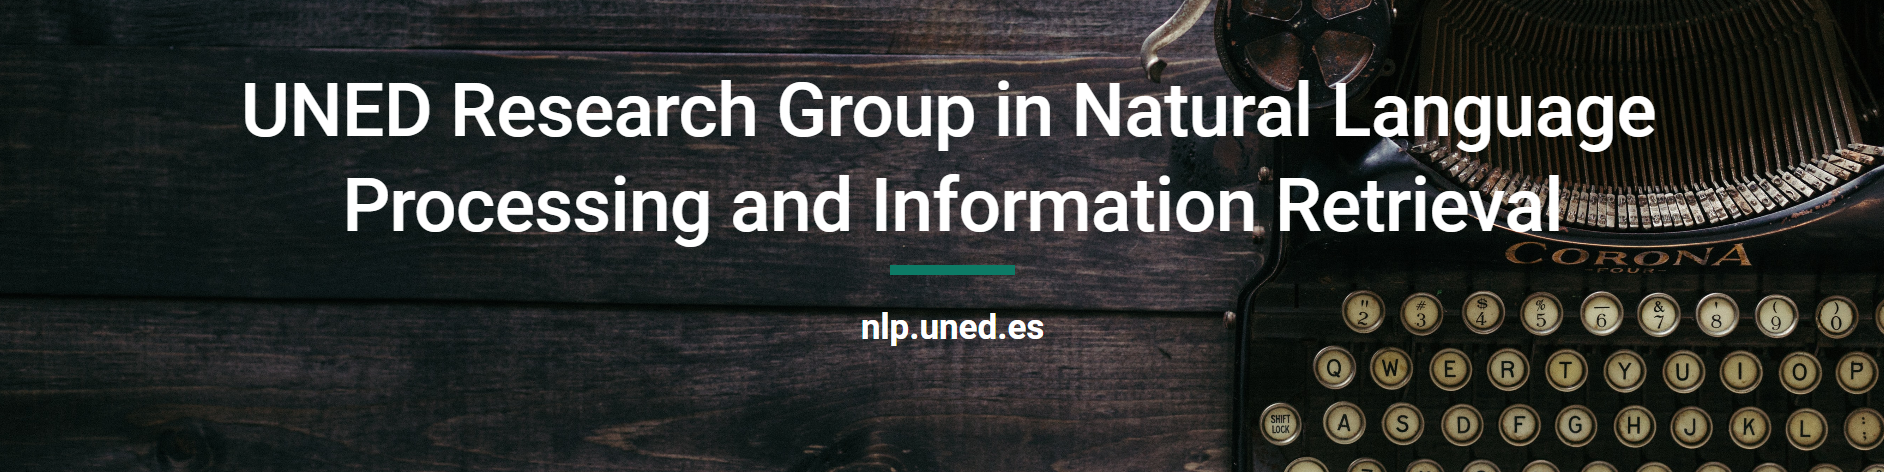 UNED Research Group in Natural Language